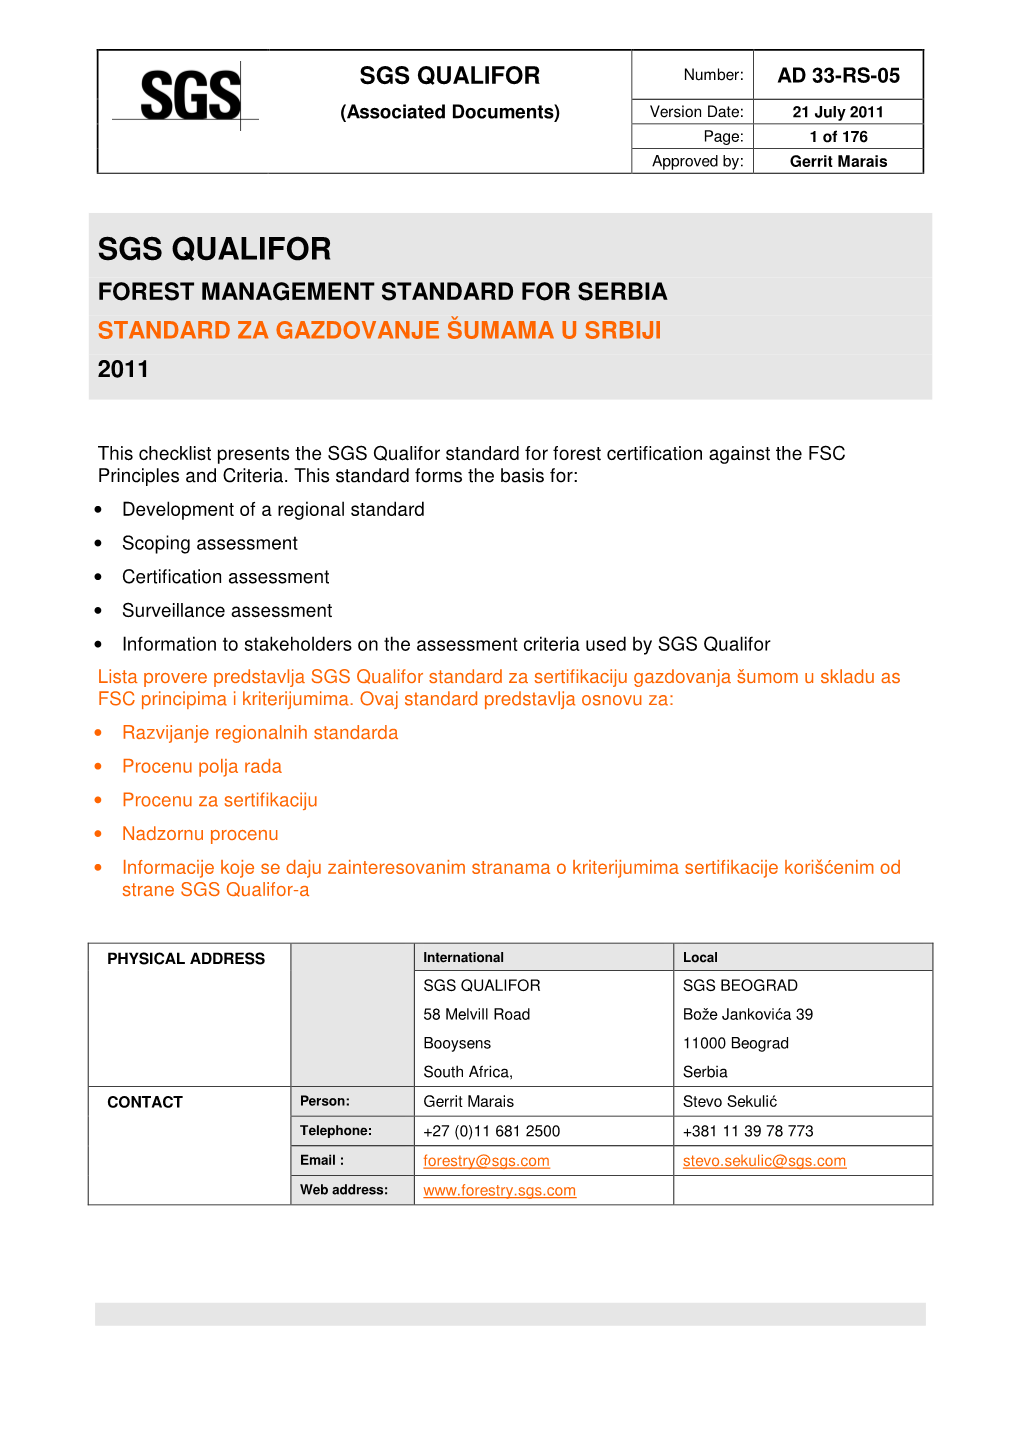 SGS QUALIFOR Number: AD 33-RS-05 (Associated Documents) Version Date: 21 July 2011 Page: 1 of 176 Approved By: Gerrit Marais